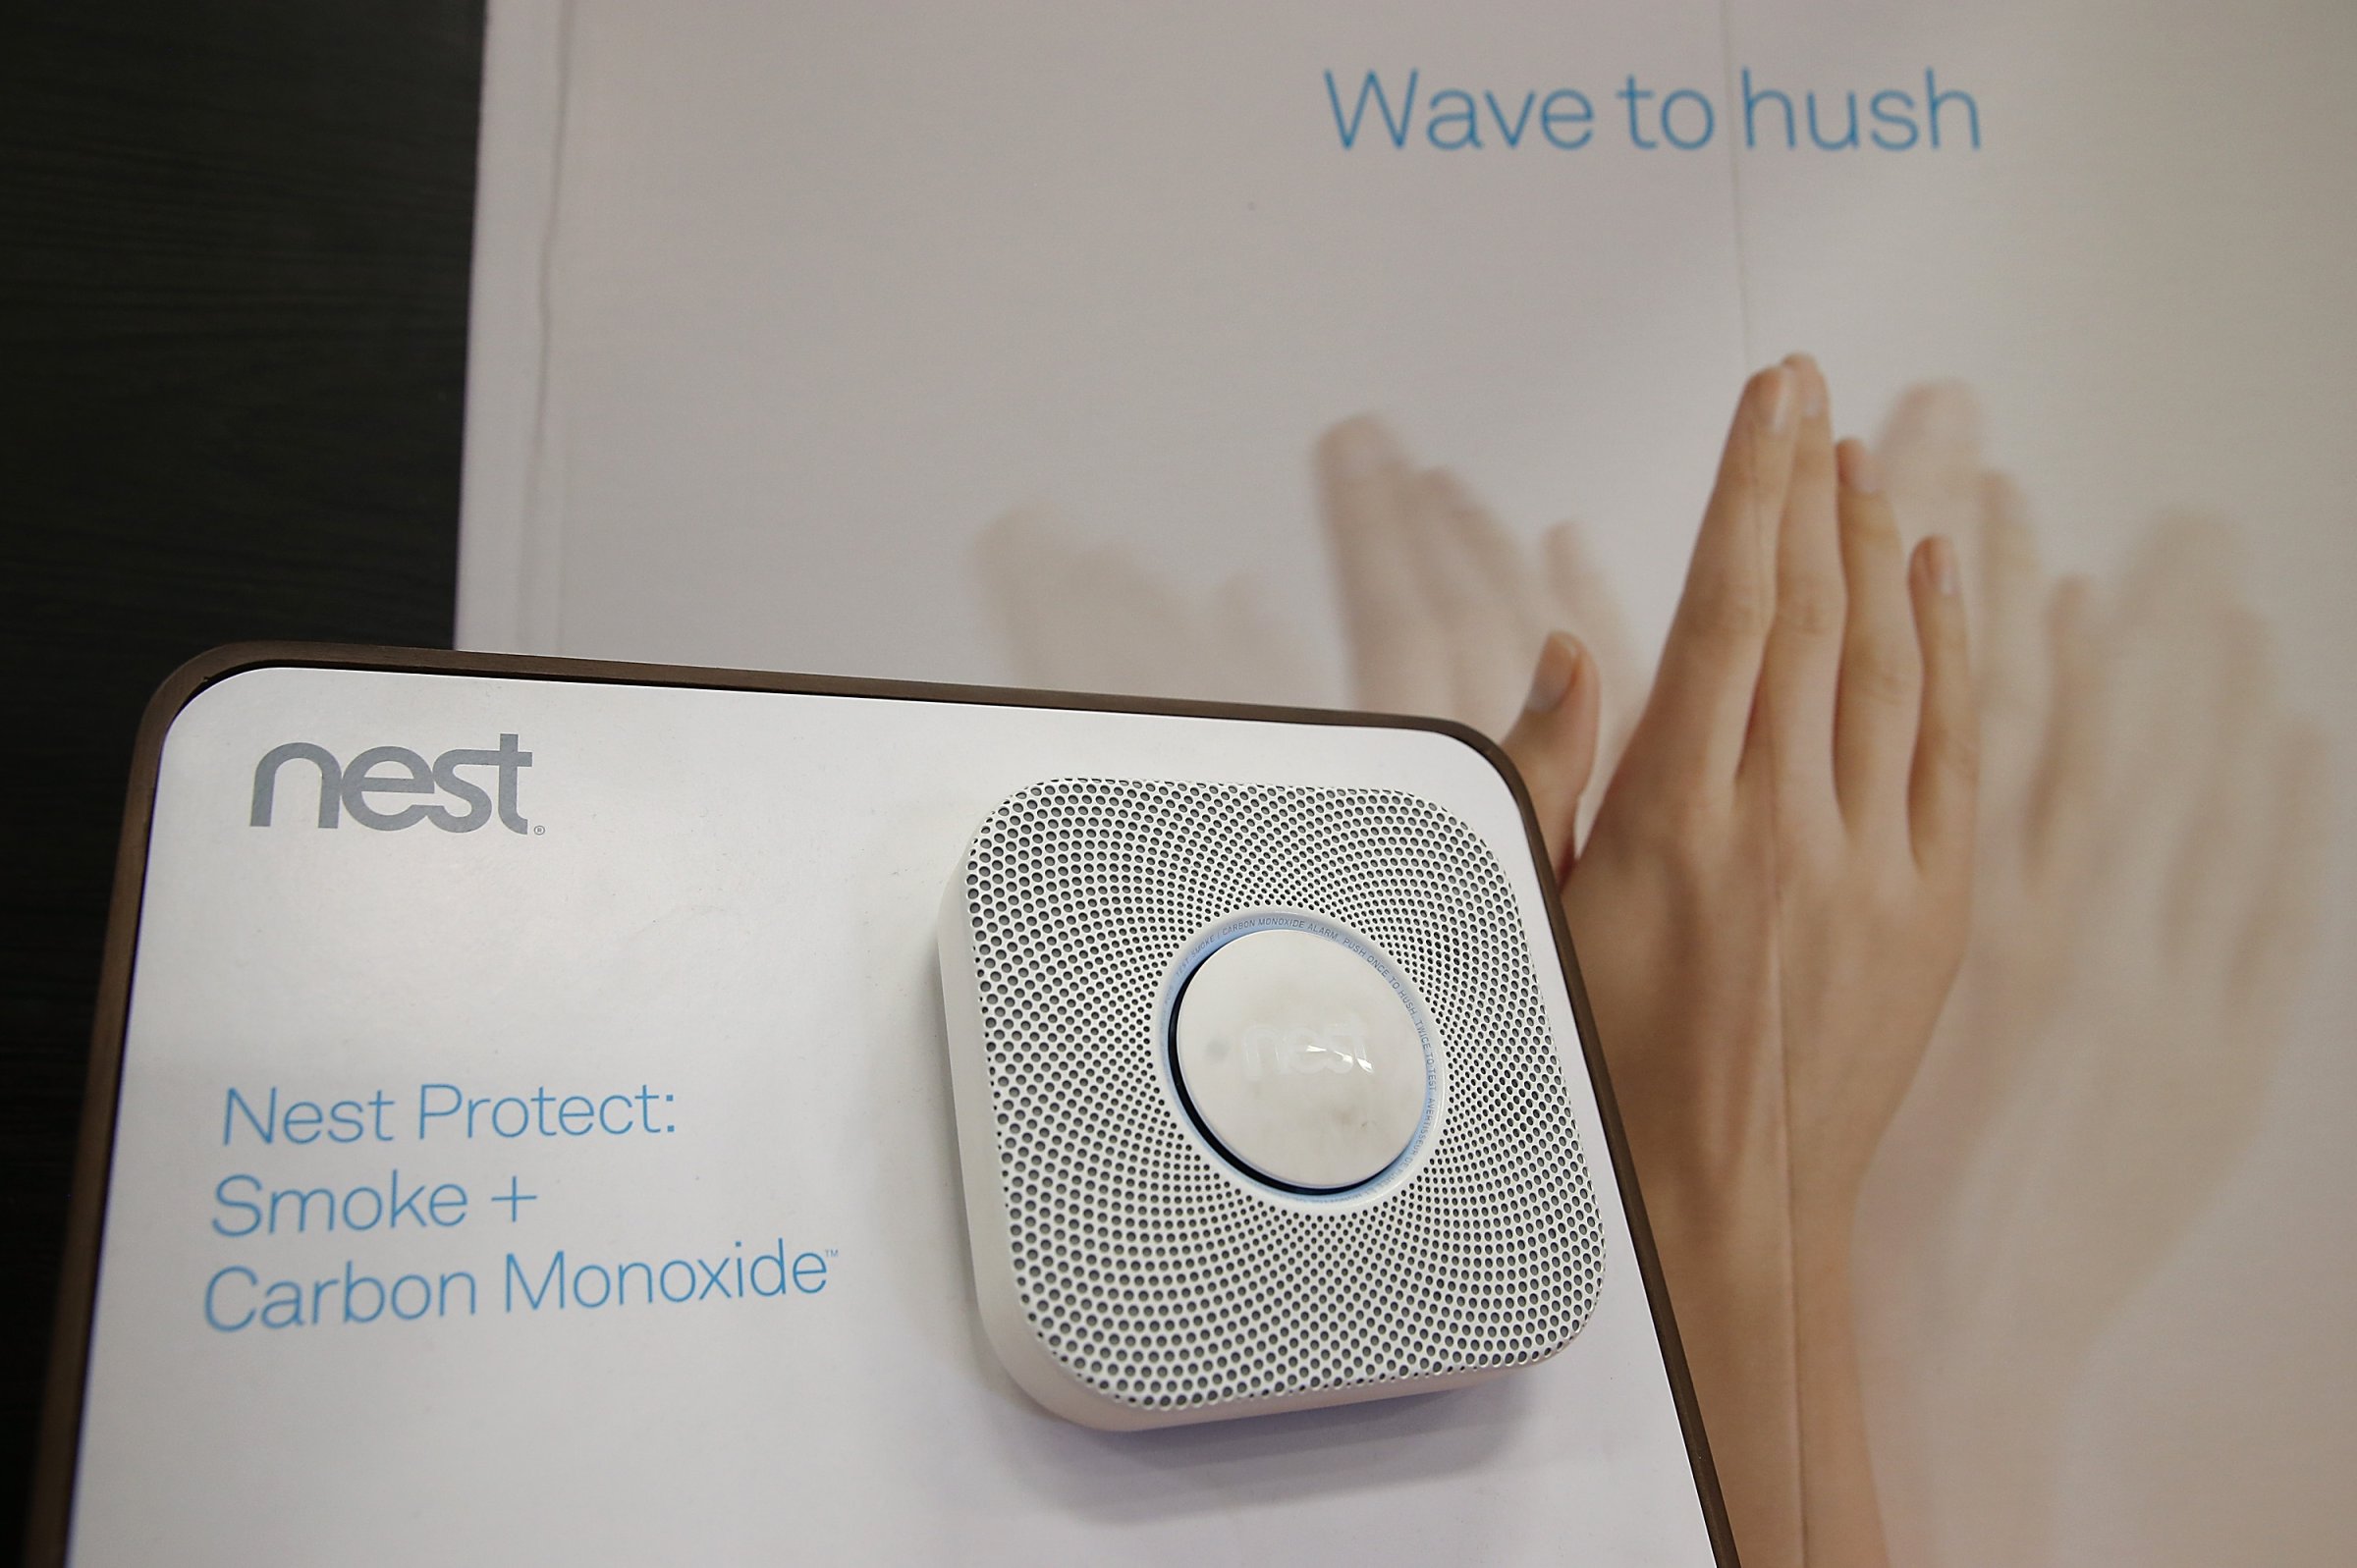 The Nest Protect smoke and carbon monoxide detector is displayed at a Home Depot store on January 13, 2014 in San Rafael, California.